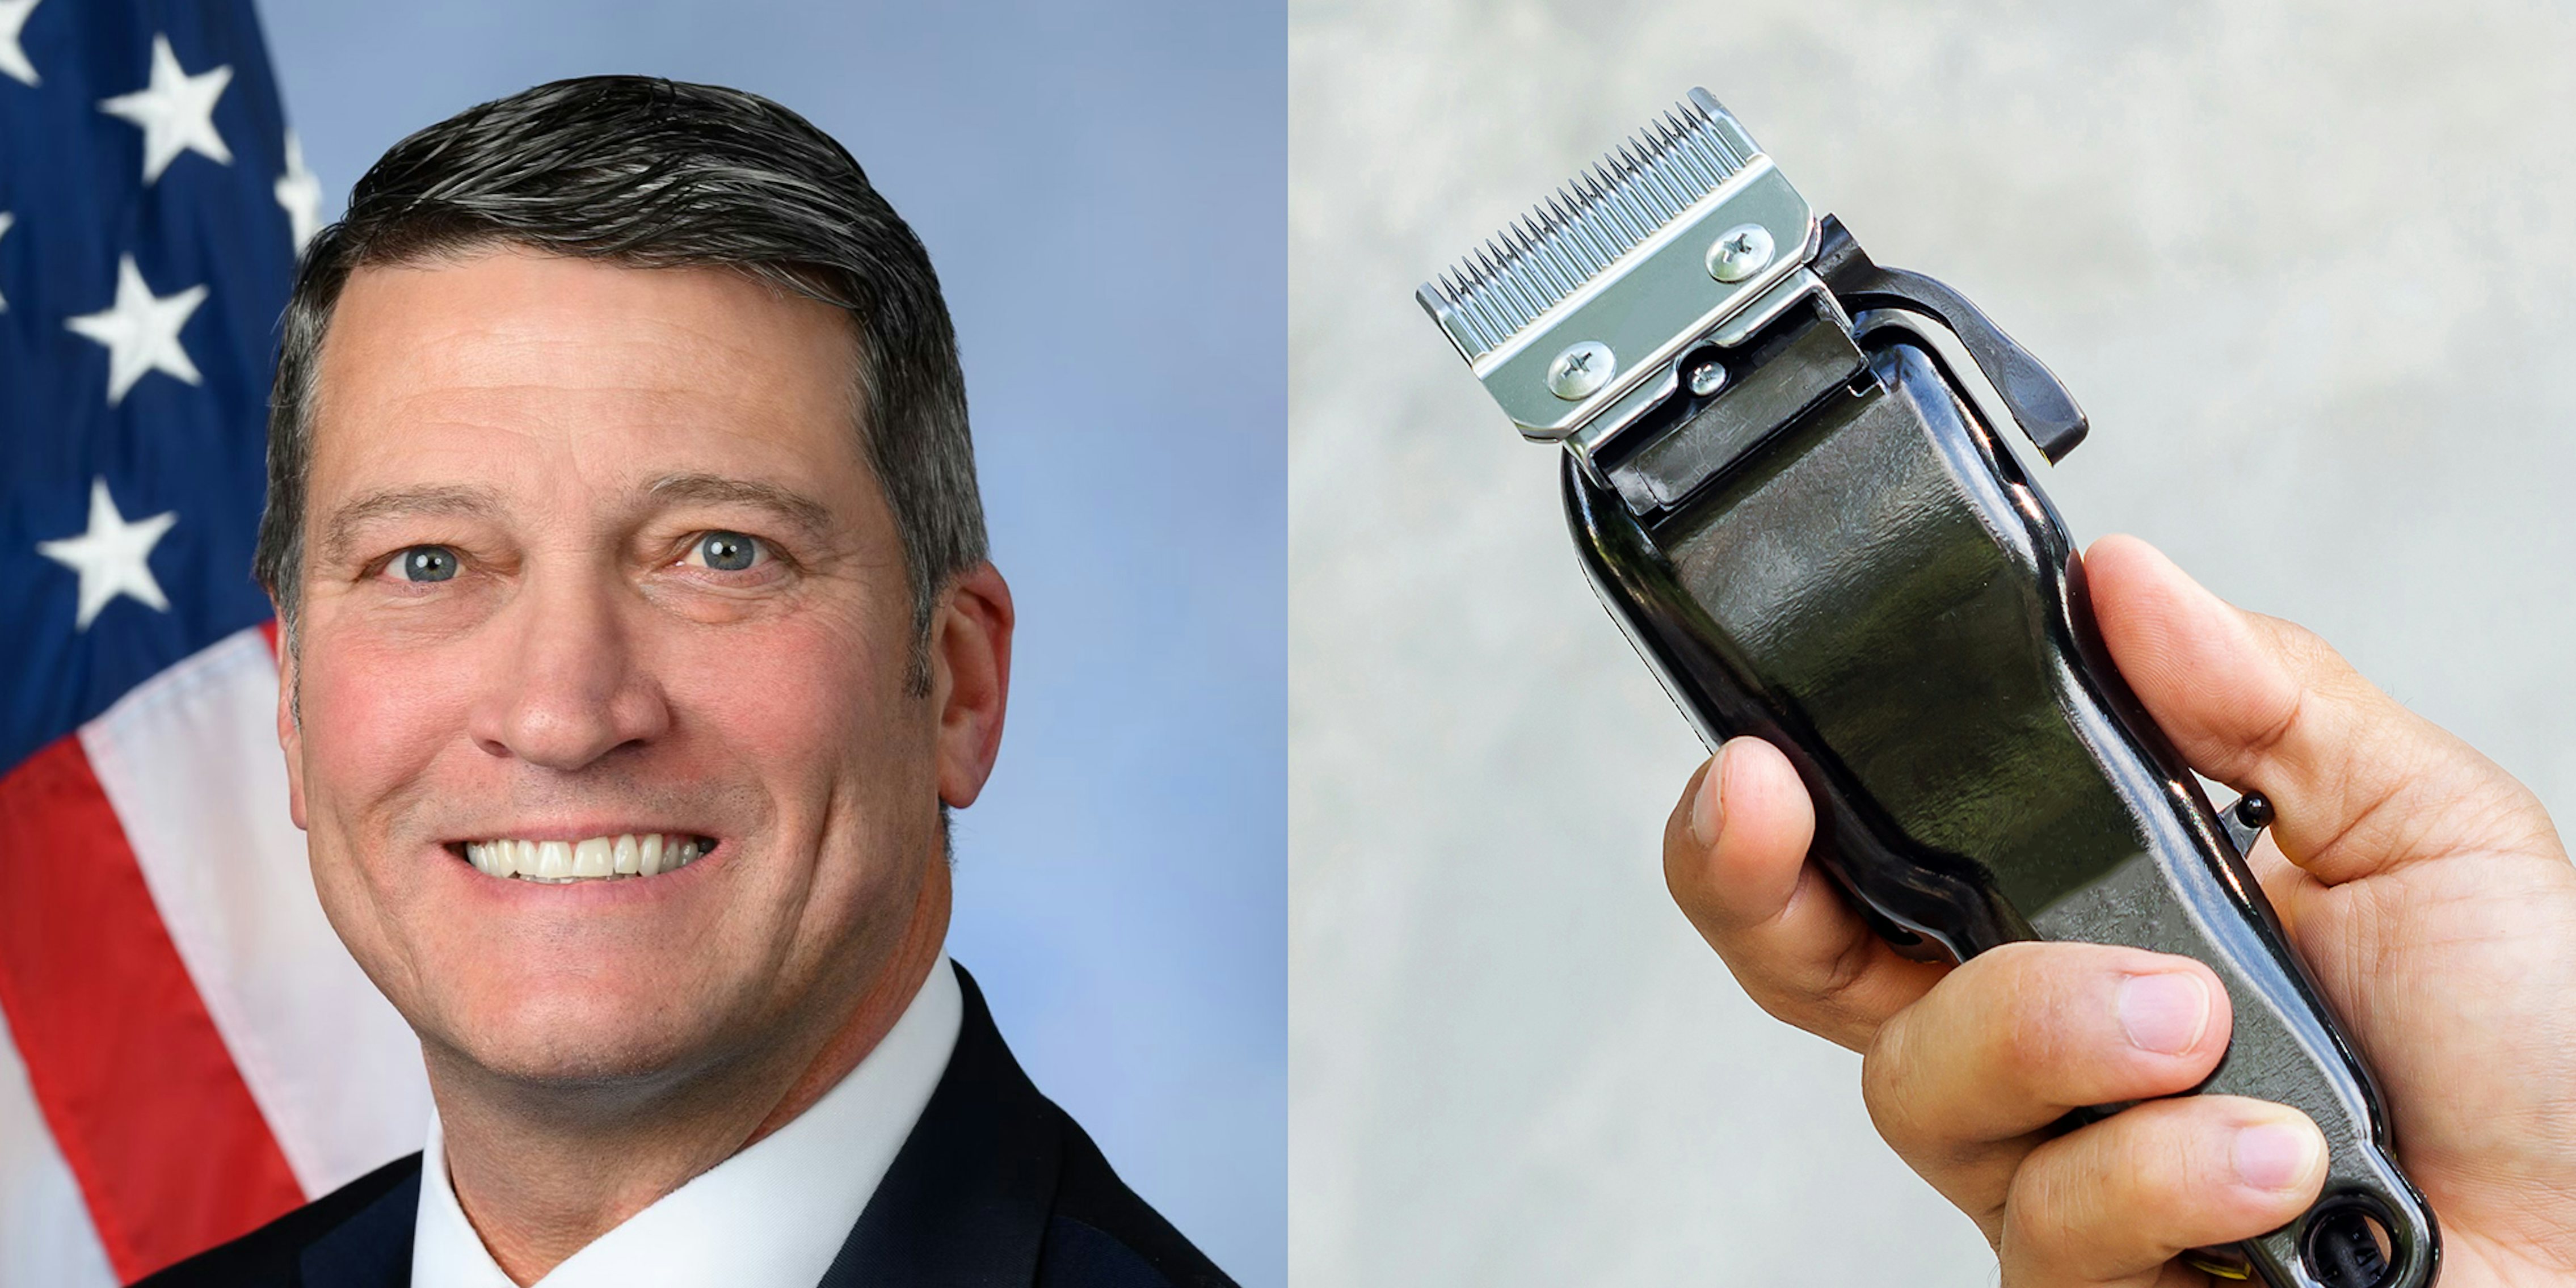 Ronny Jackson (l) hand holding hair clippers (r)